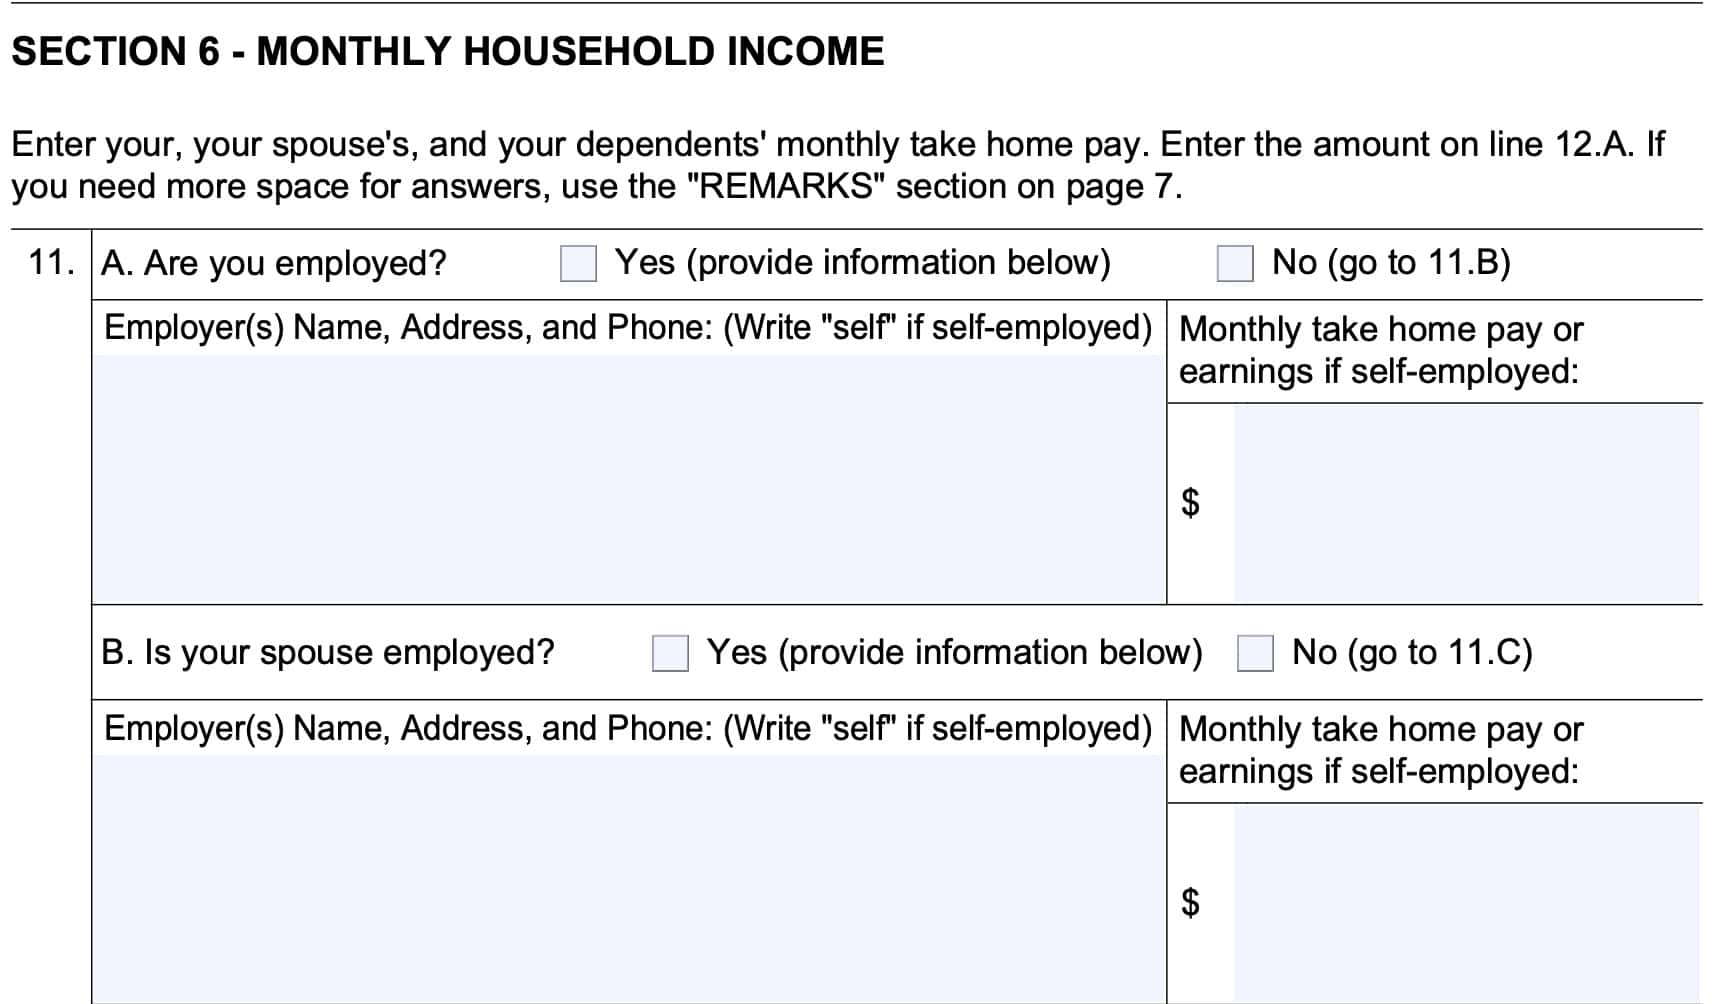 form ssa 632-bk, section 6: monthly household income, question 11A and 11b